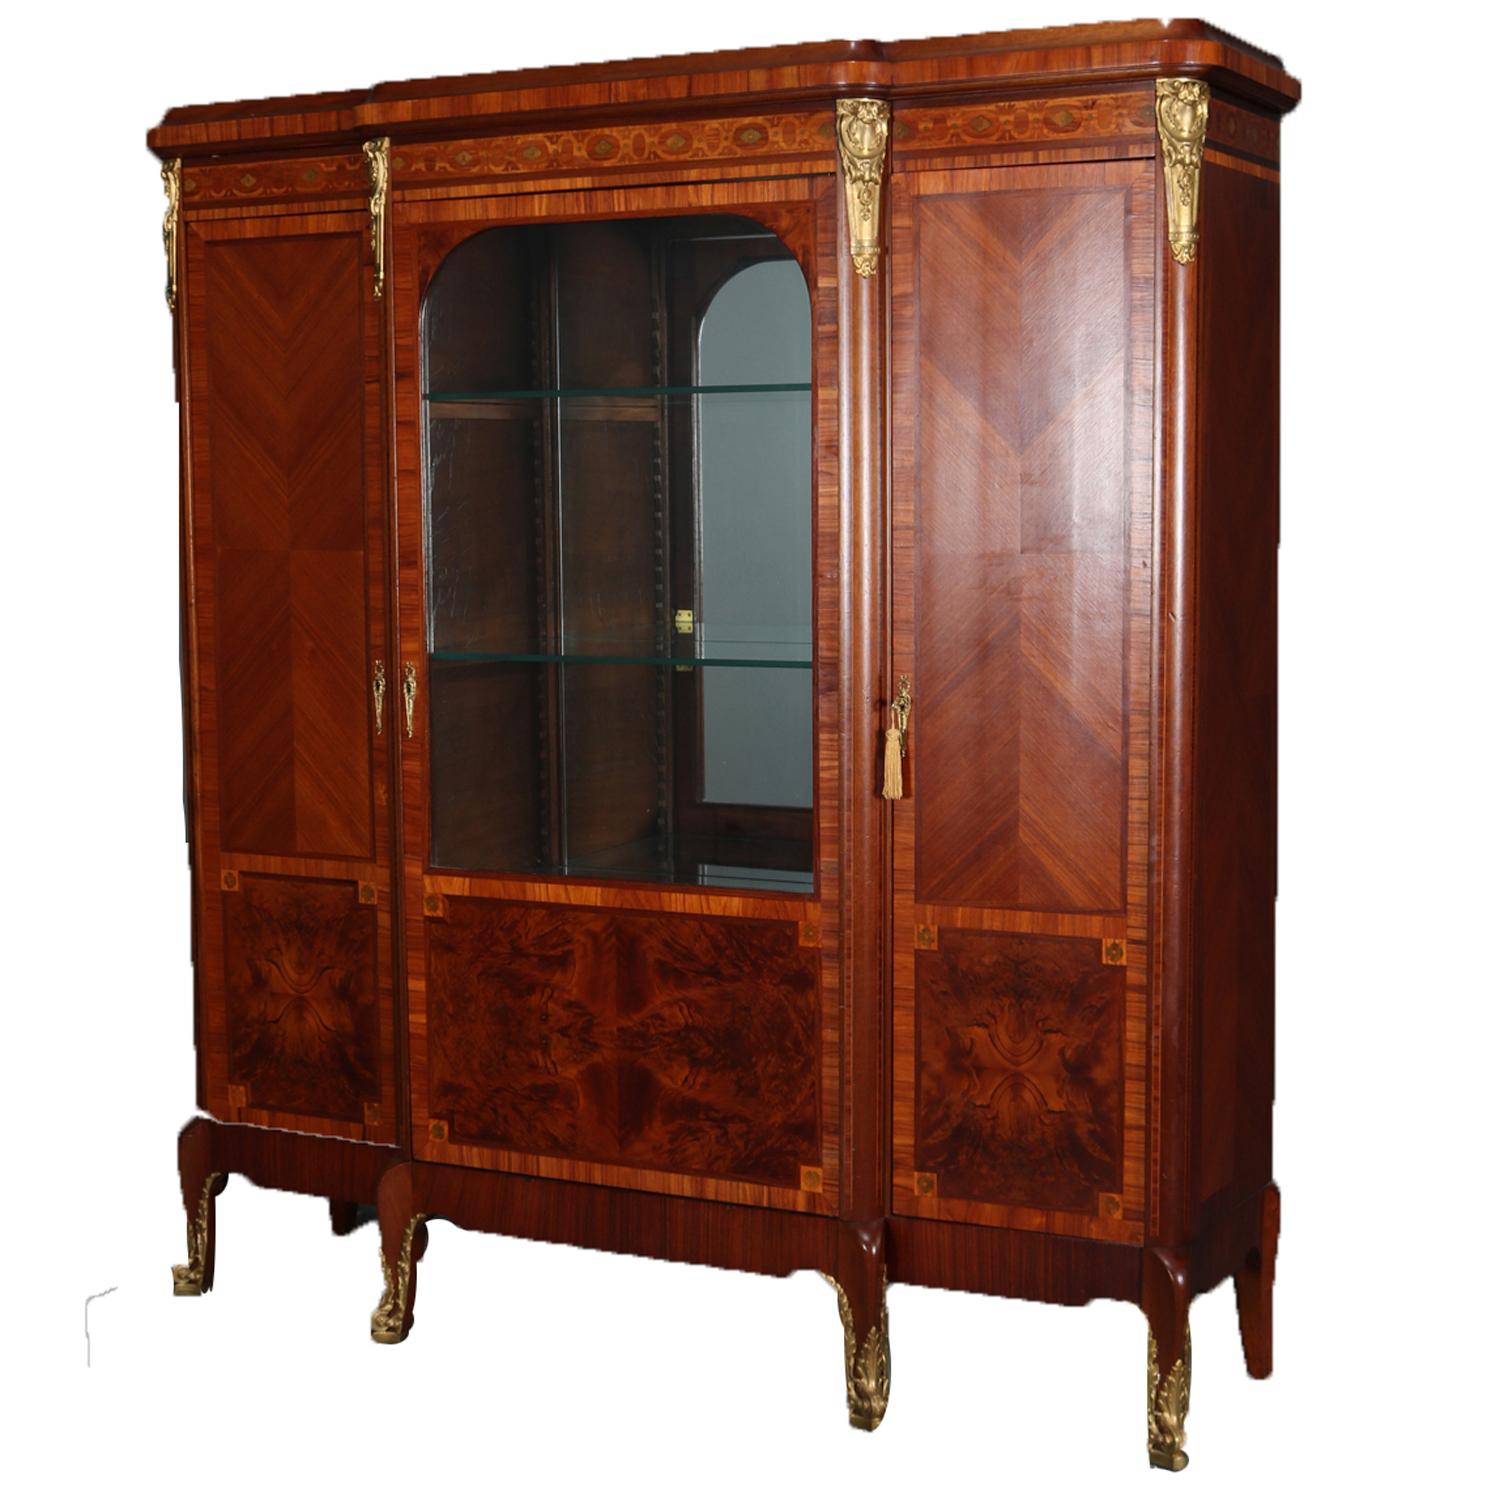 French Louis XV school flame mahogany locking china display cabinet features crossbanded and inlaid frieze over central glass door opening to mirror back and shelved interior and flanked by blind doors with book matched and burl elements opening to